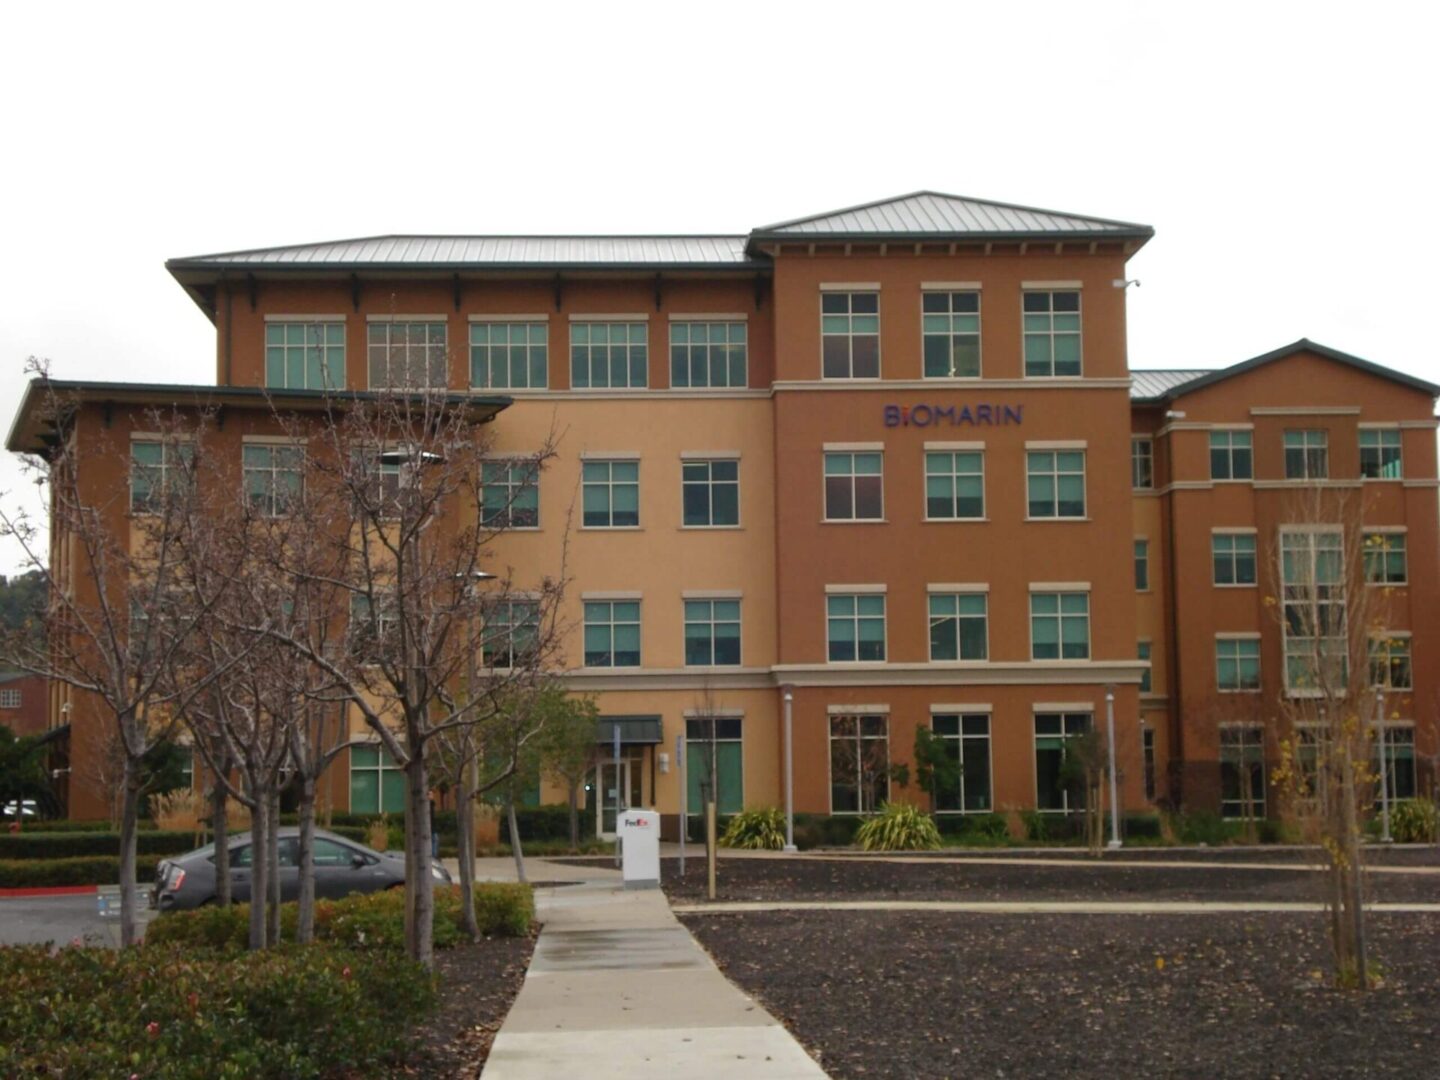 A building with many windows and a walkway.